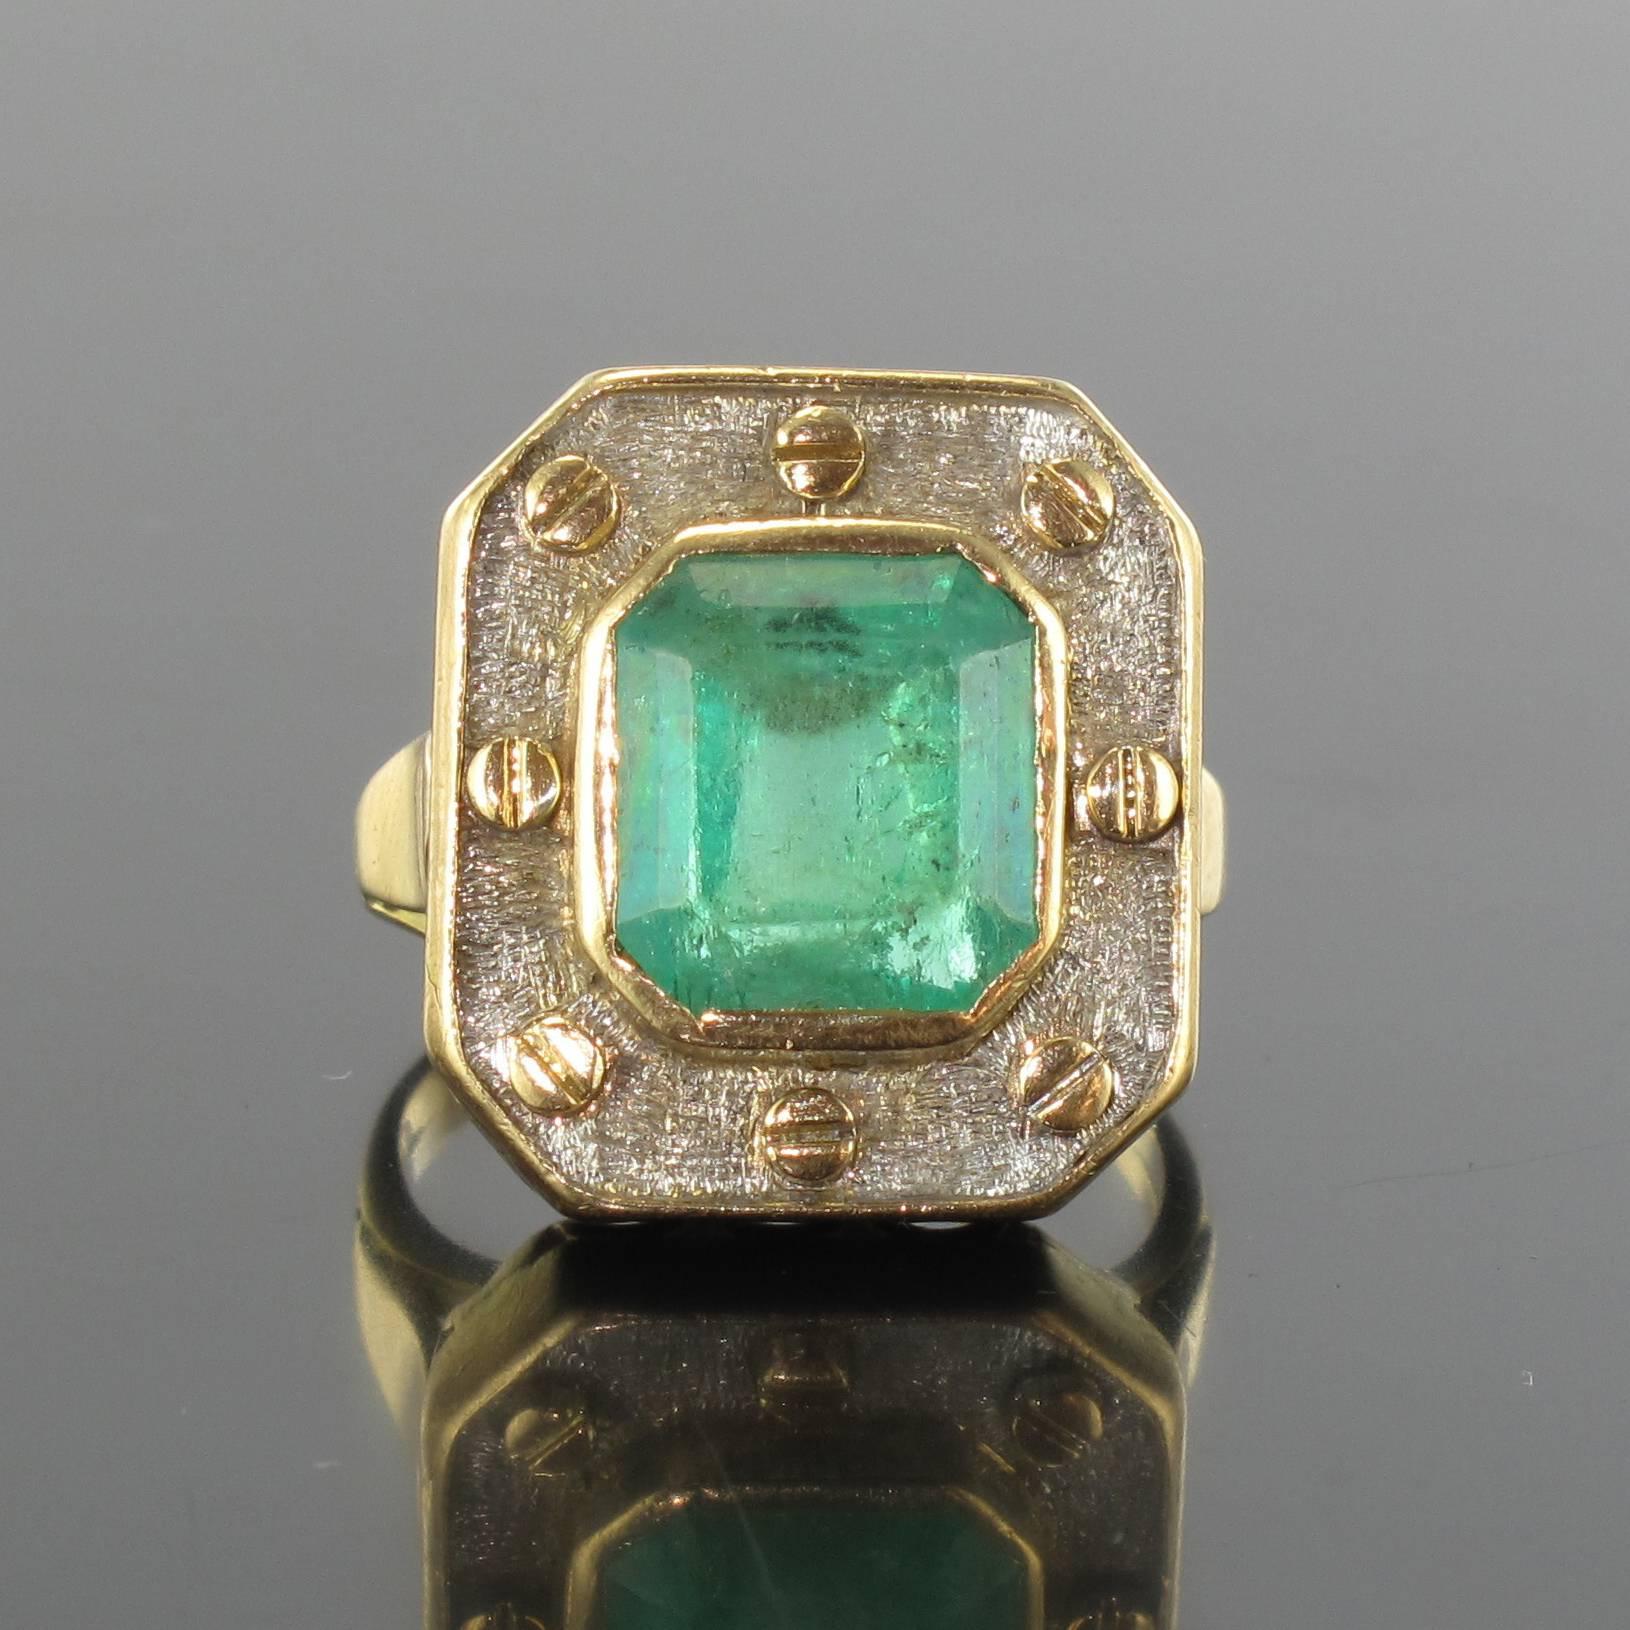 Ring in 18 carat white and yellow gold, eagle head hallmark. 

An imposing emerald ring formed of a chiselled white gold bed holding a bezel set emerald accentuated by the surrounding 8 yellow gold screw heads. The openwork bed allows light to